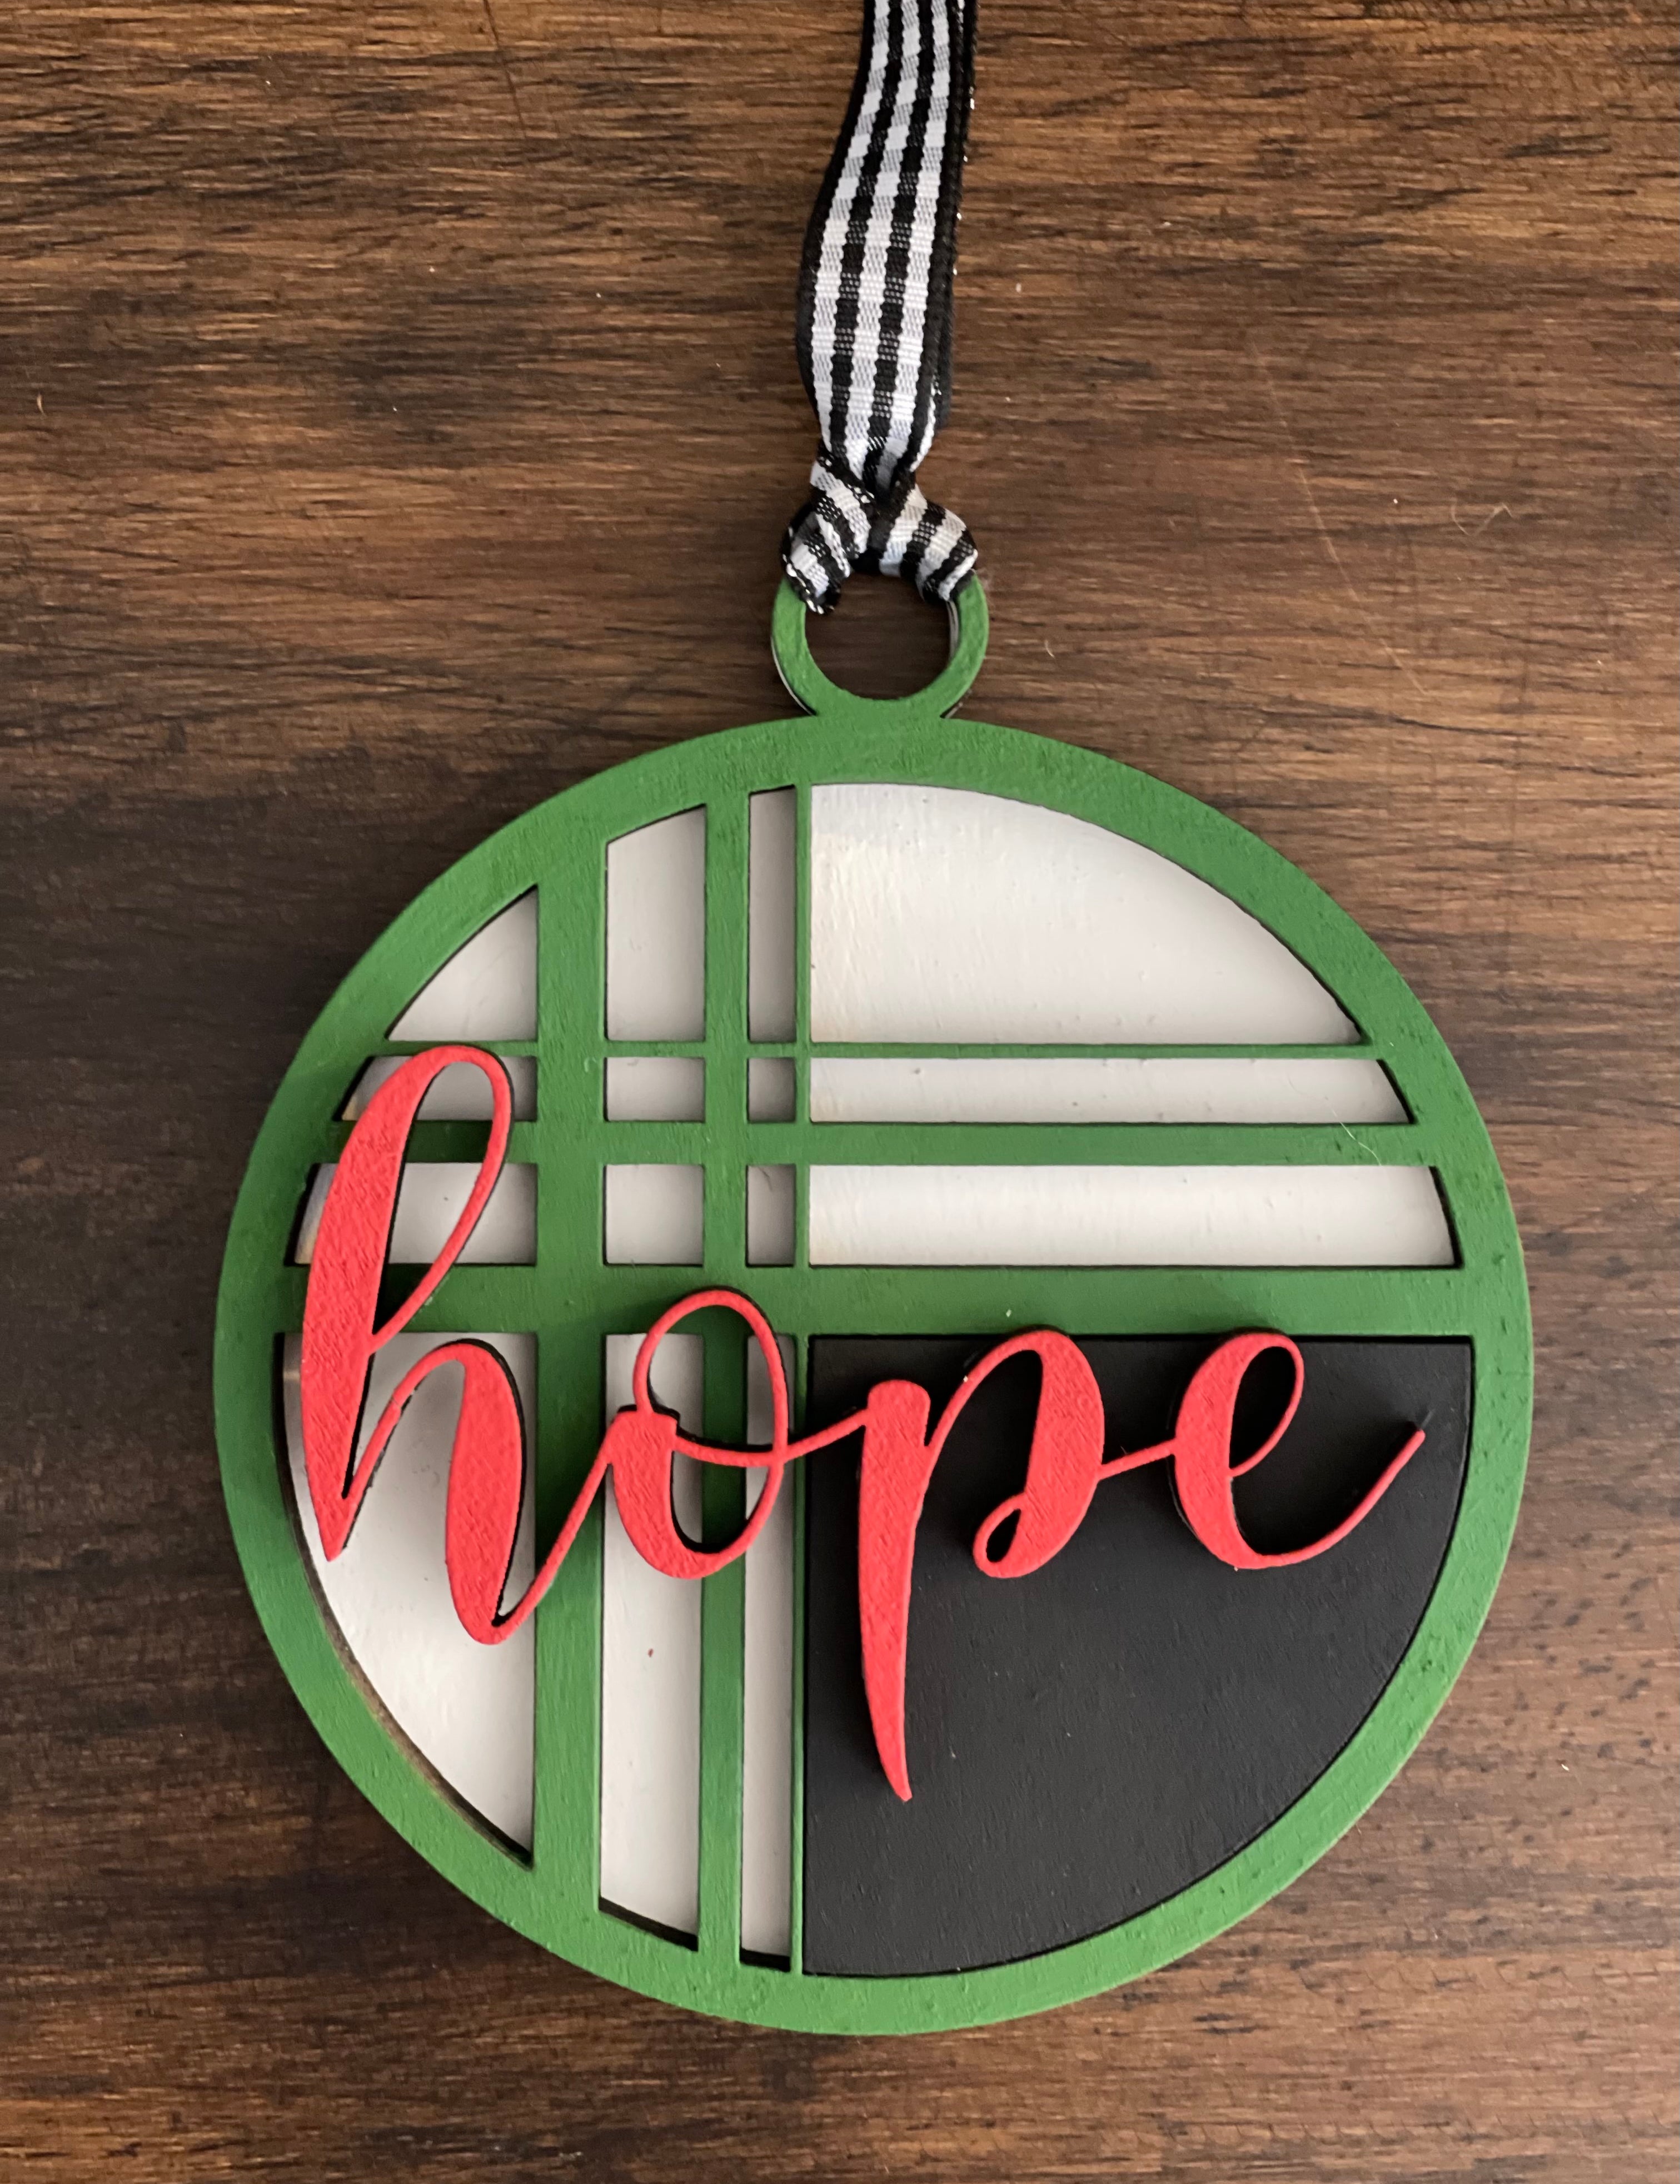 This is the red, green, black and white hope ornament without a twine bow.